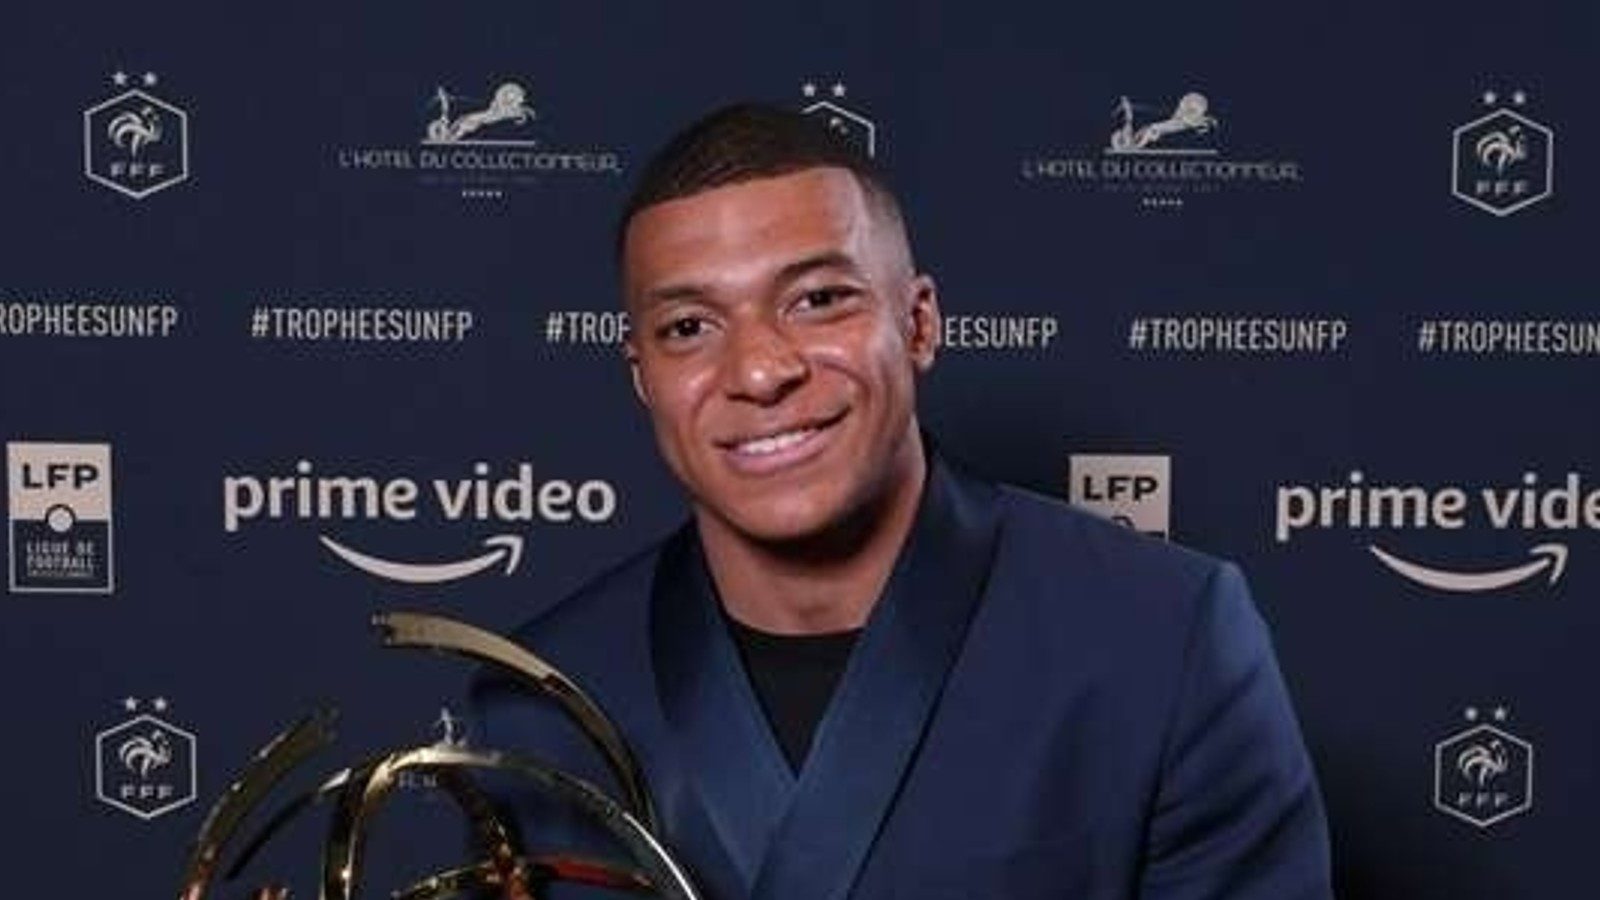 PSG Star Kylian Mbappe Wins French League Best Player Award for Third Time